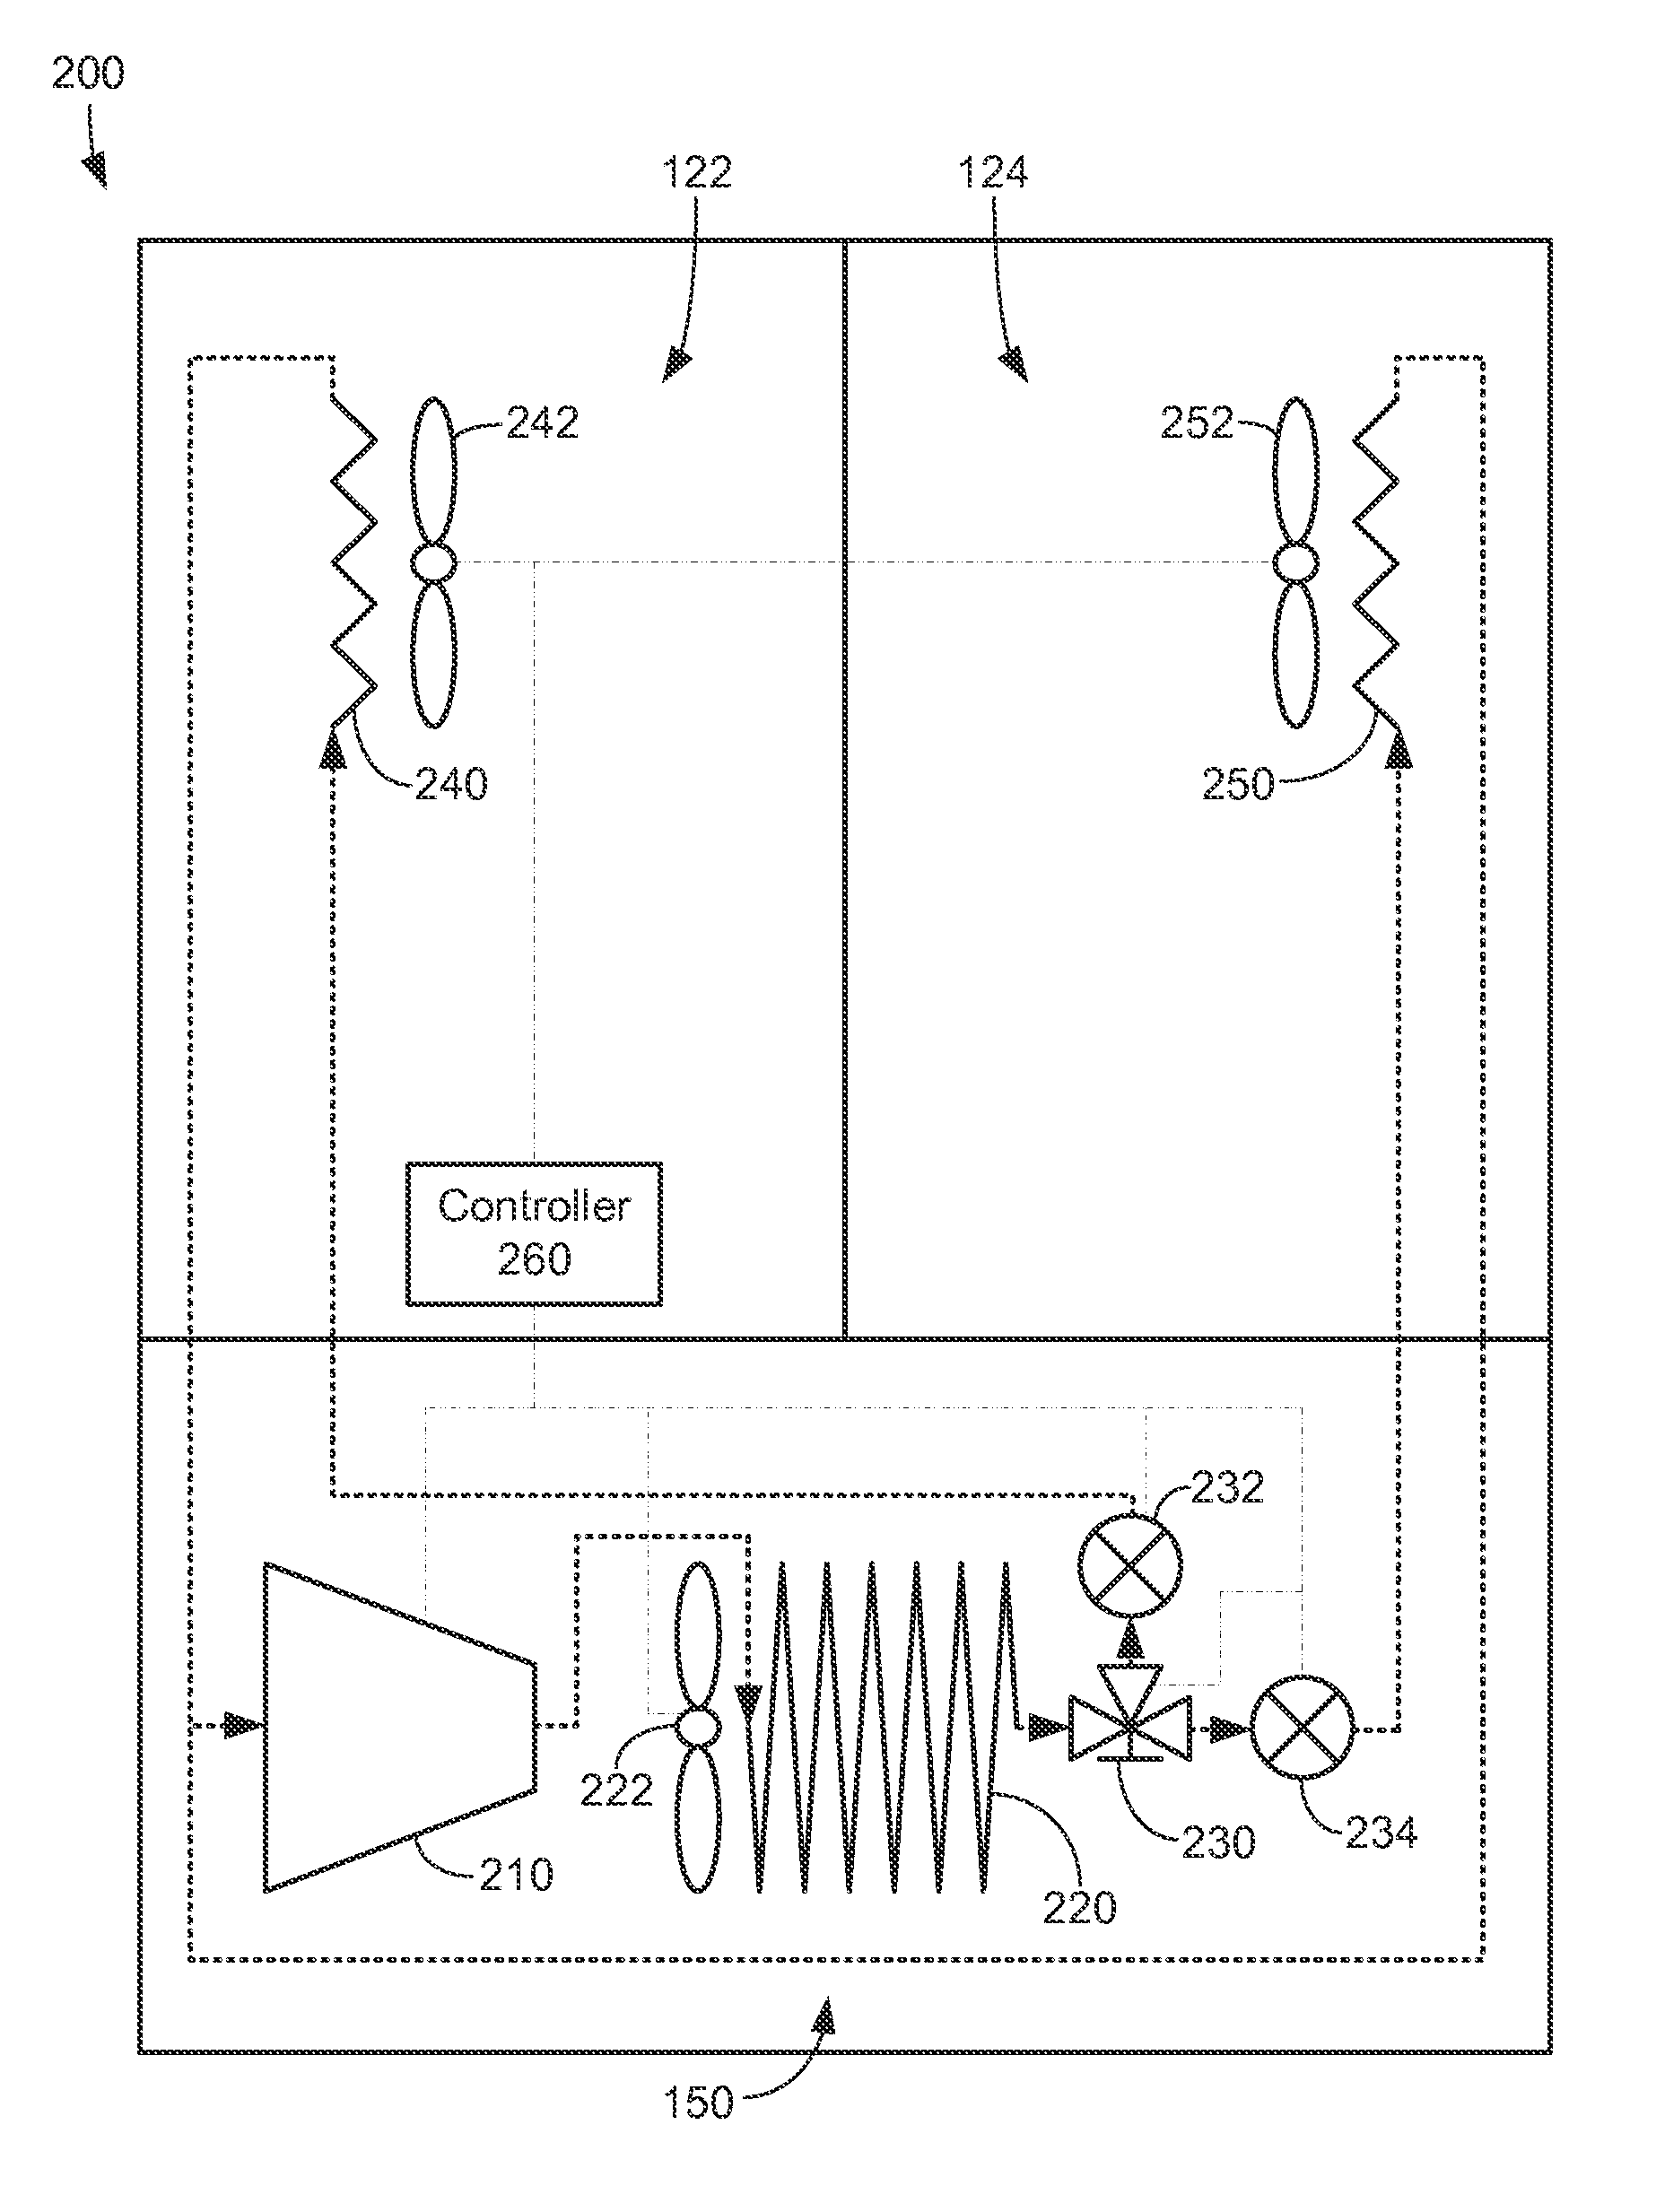 Method for operating a refrigerator appliance